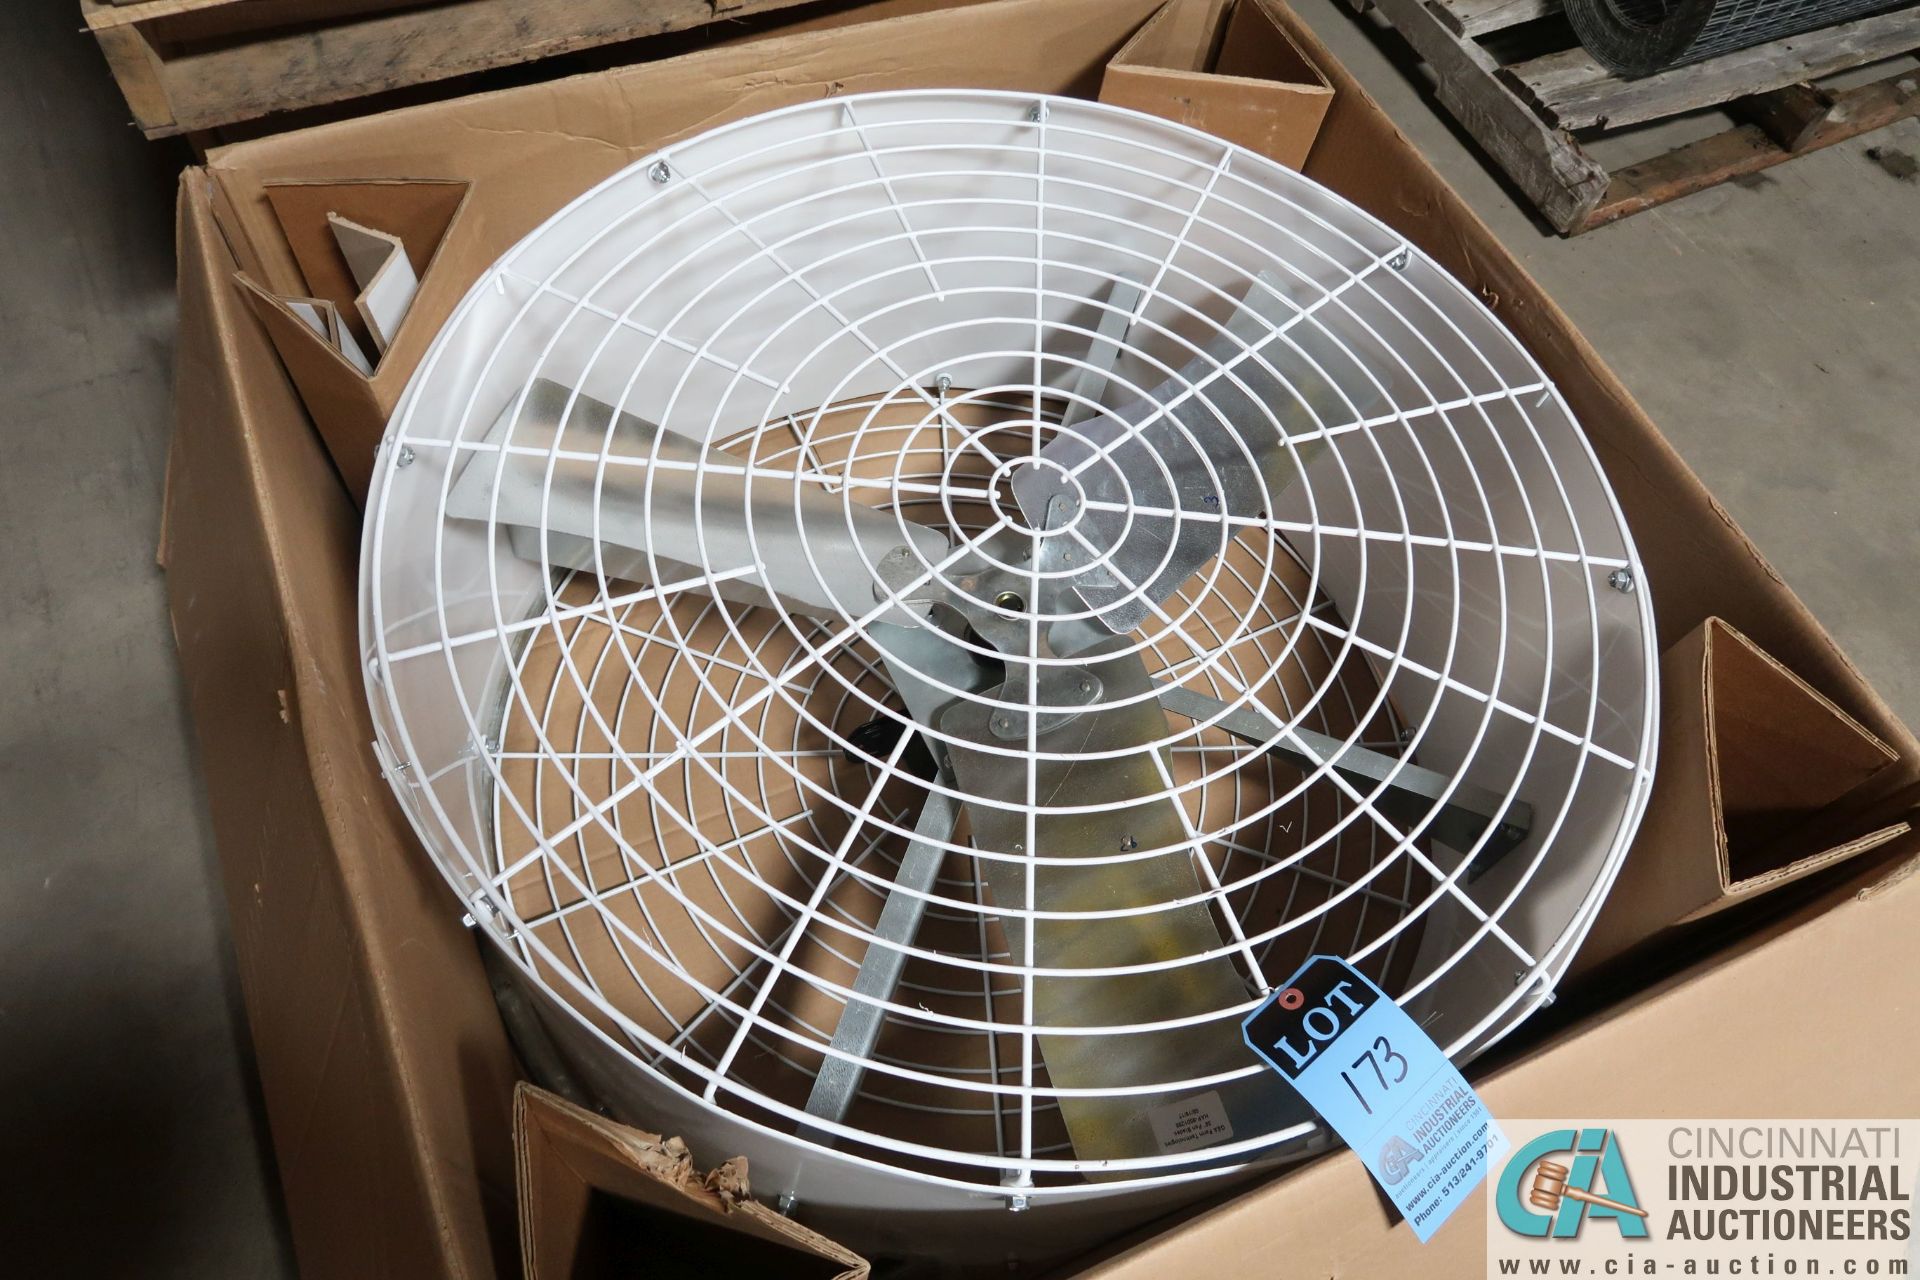 36" GEA MODEL 5133-0121-009 FANS, 1/2 HP, 3 PHASE ** NEW IN BOX ** - Image 2 of 3